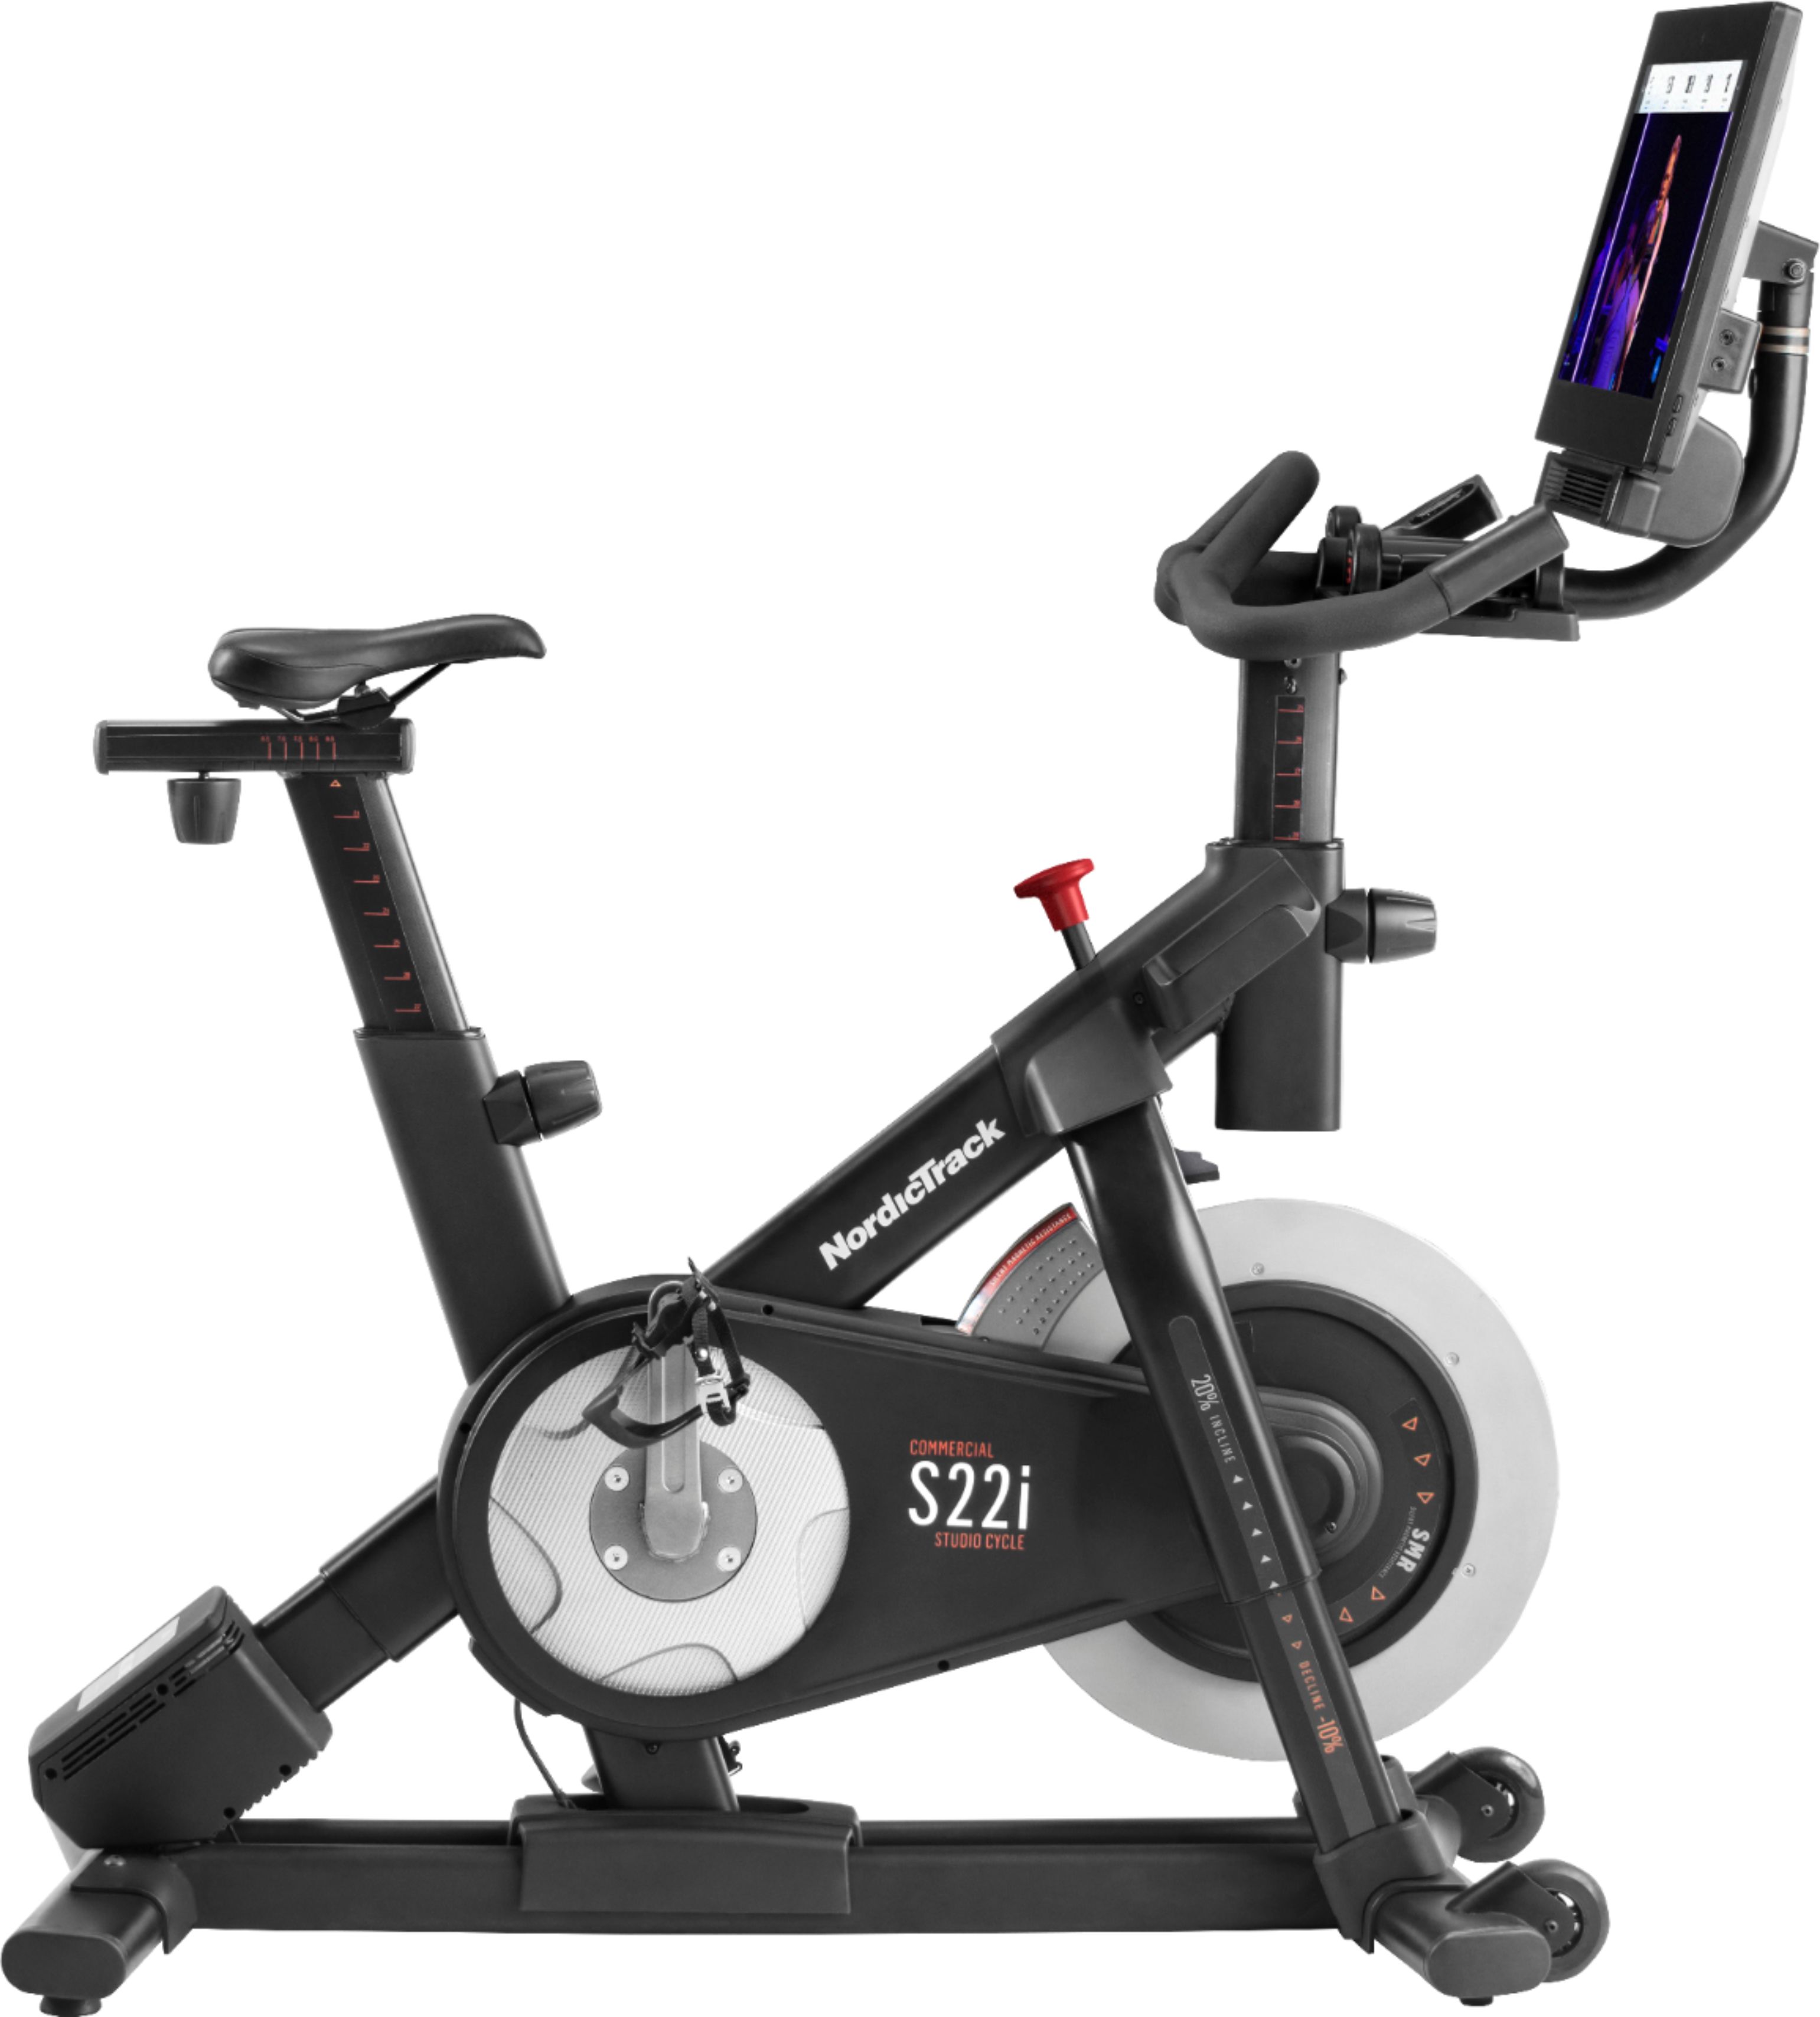 nordictrack exercise bike for sale